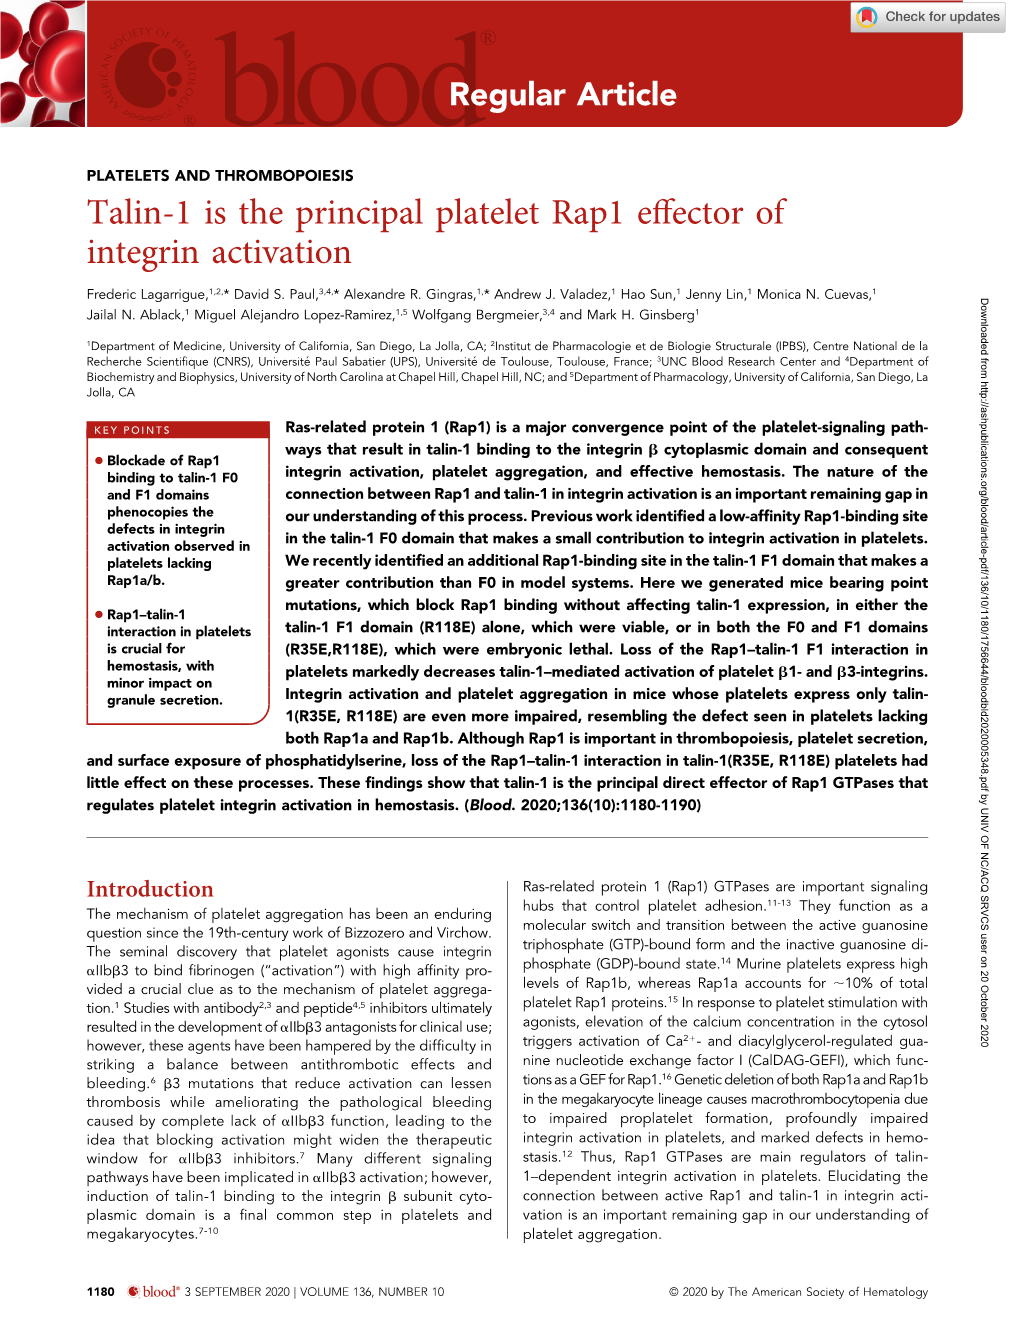 Talin-1 Is the Principal Platelet Rap1 Effector of Integrin Activation